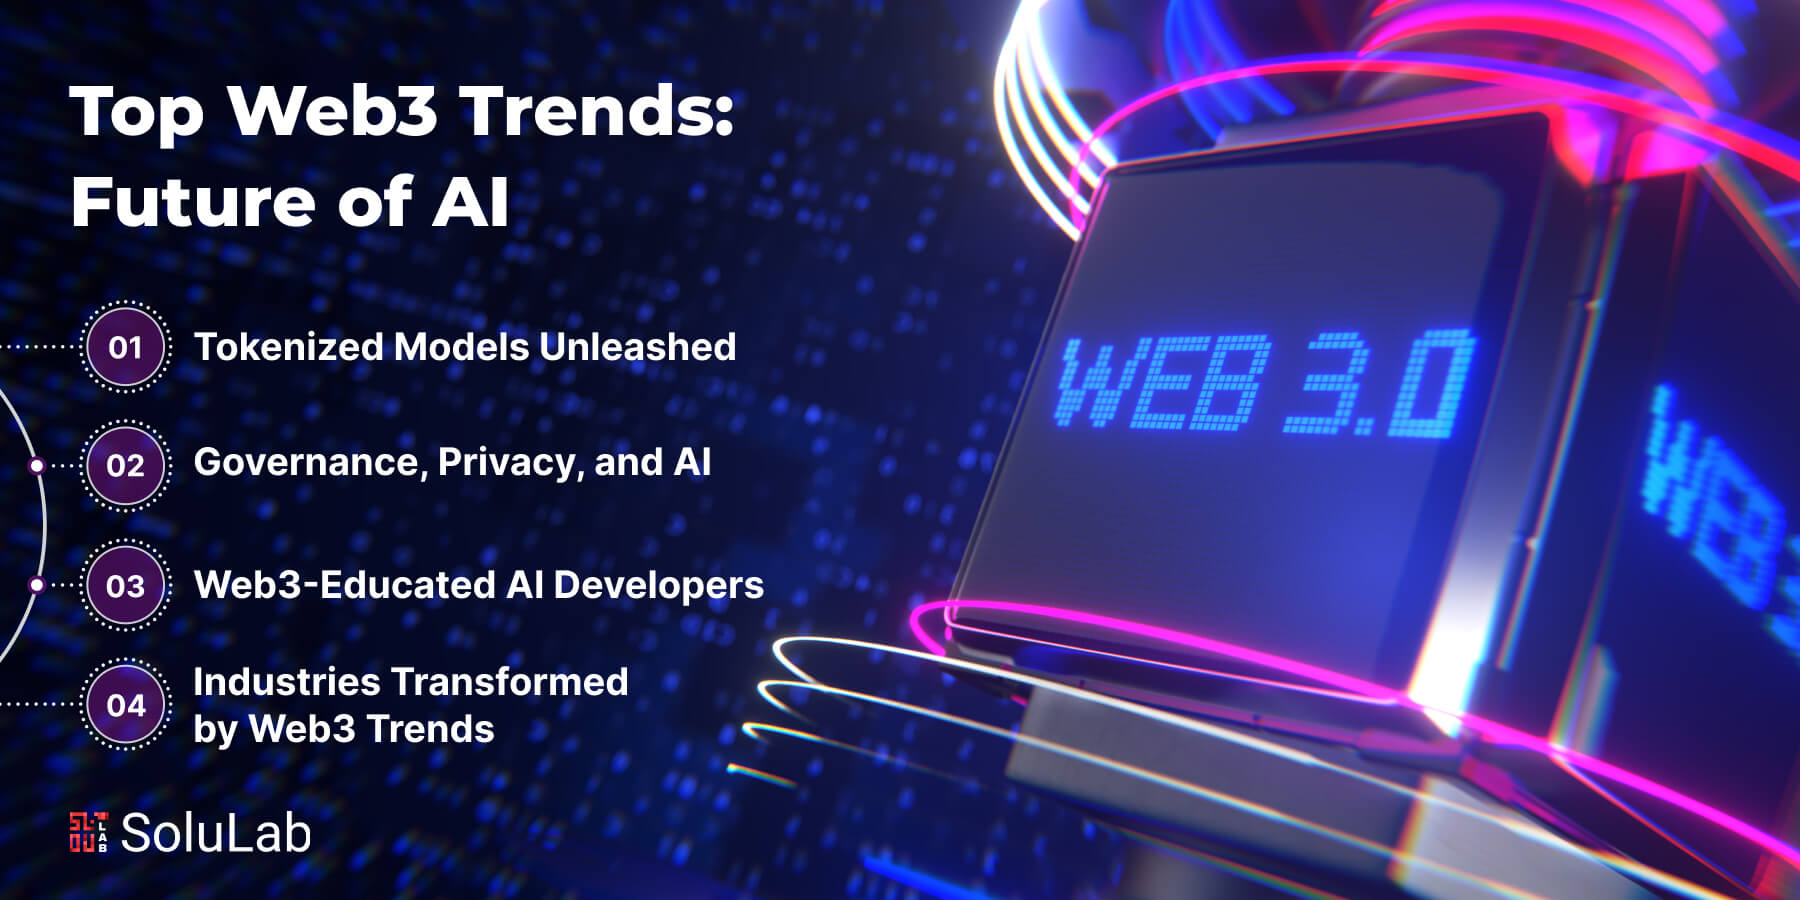 Web3 Trends Shaping the Future of AI